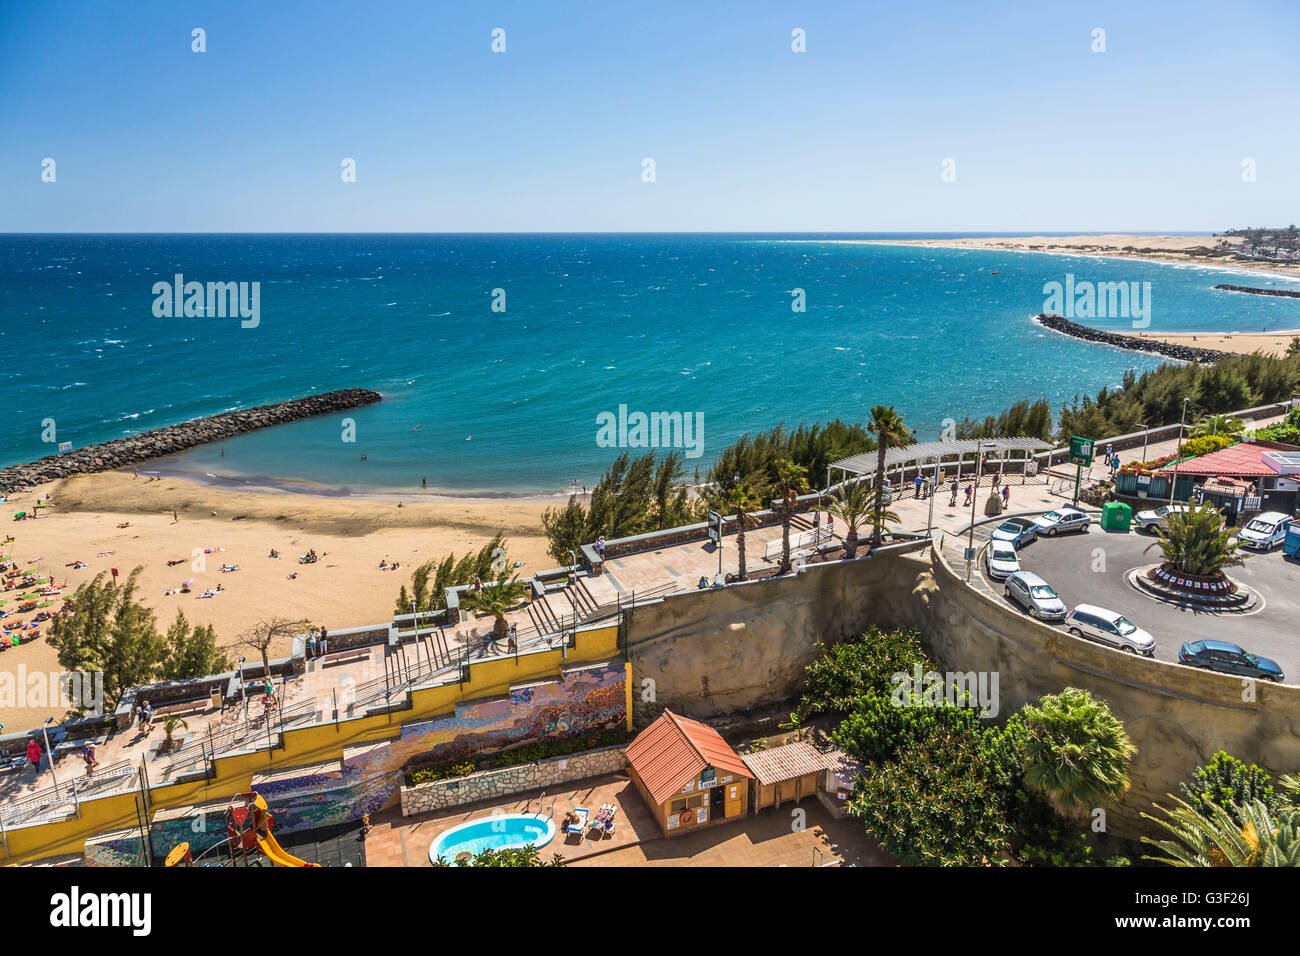 Beach of Playa del Inglés, in the background the dunes of Maspalomas, Gran Canaria, Spain Stock Photo